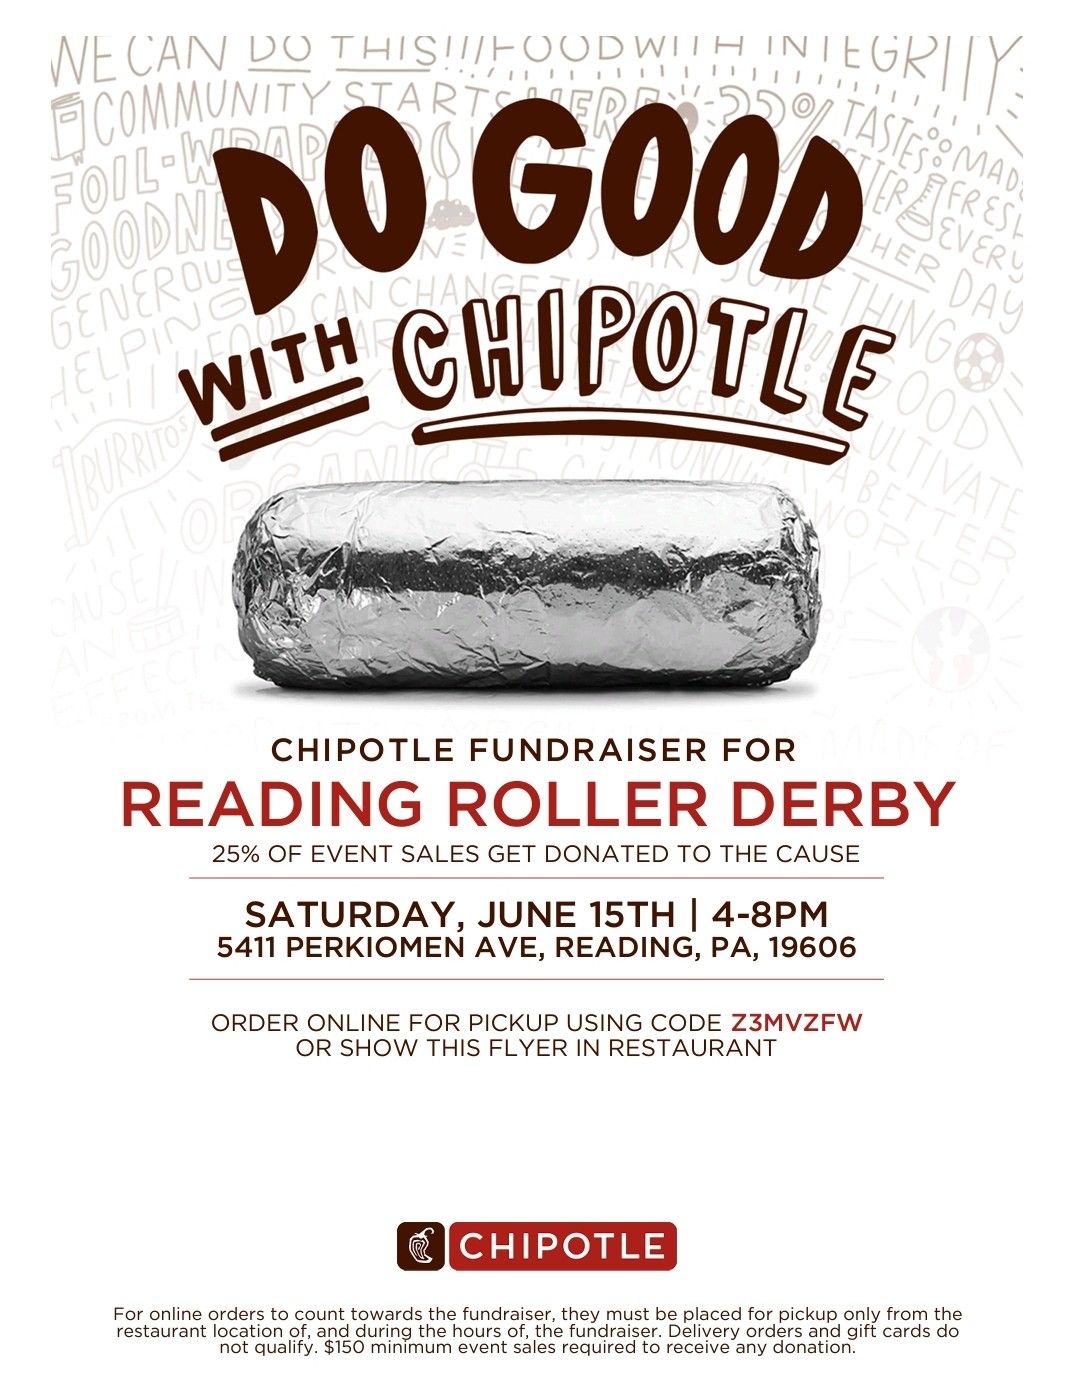 Chipotle Fundraiser for Reading Roller Derby